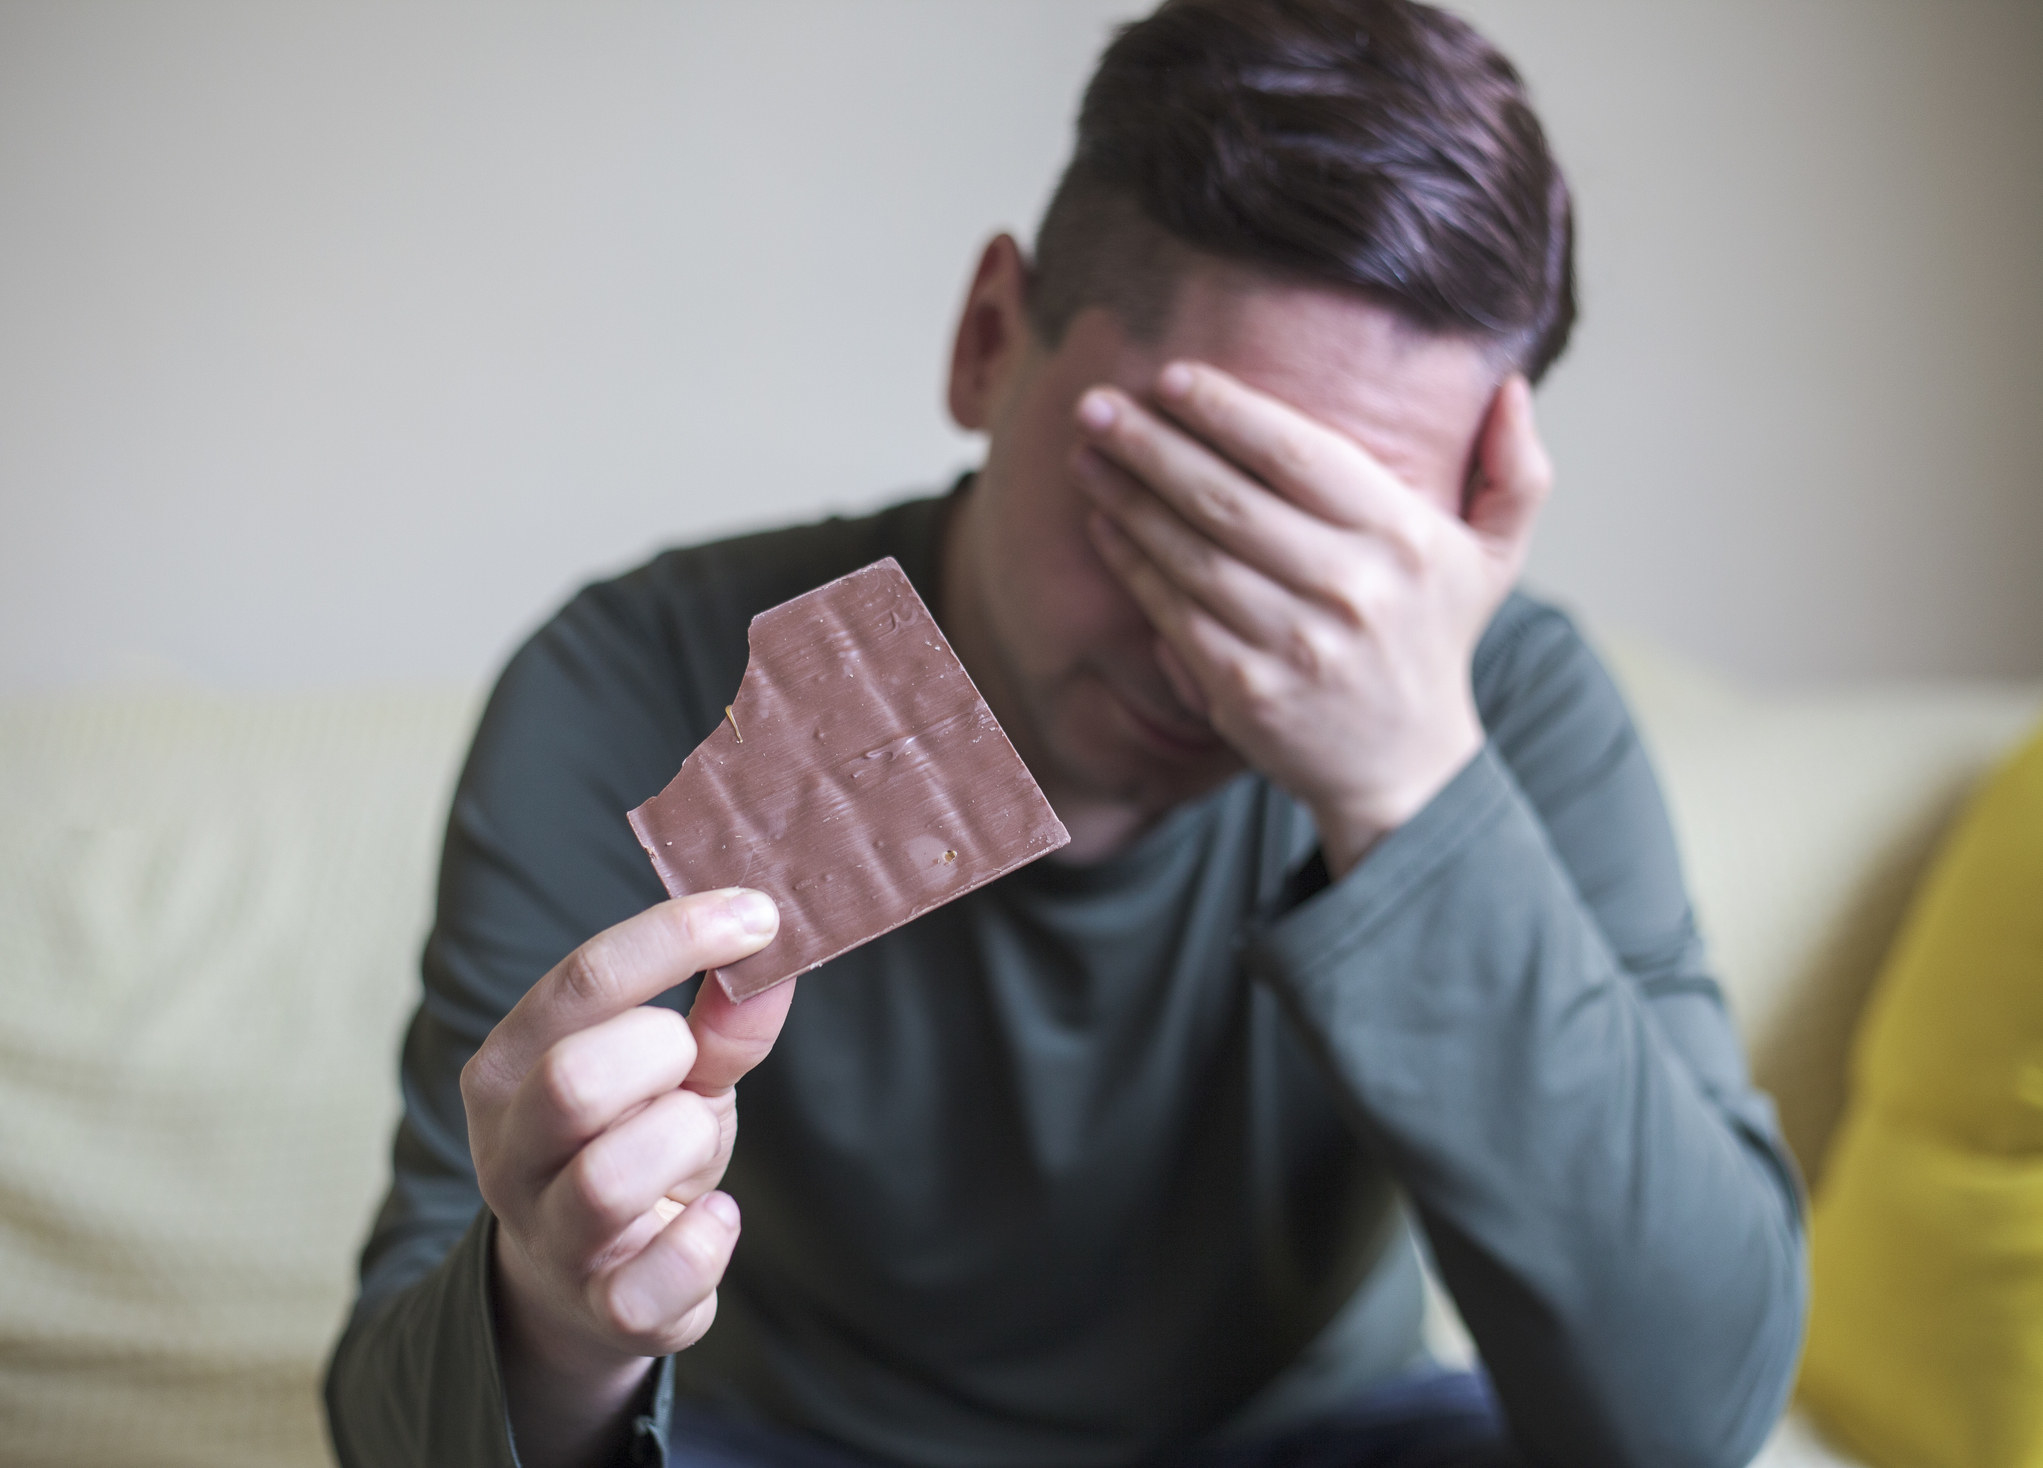 A man eating chocolate with his head in his hands